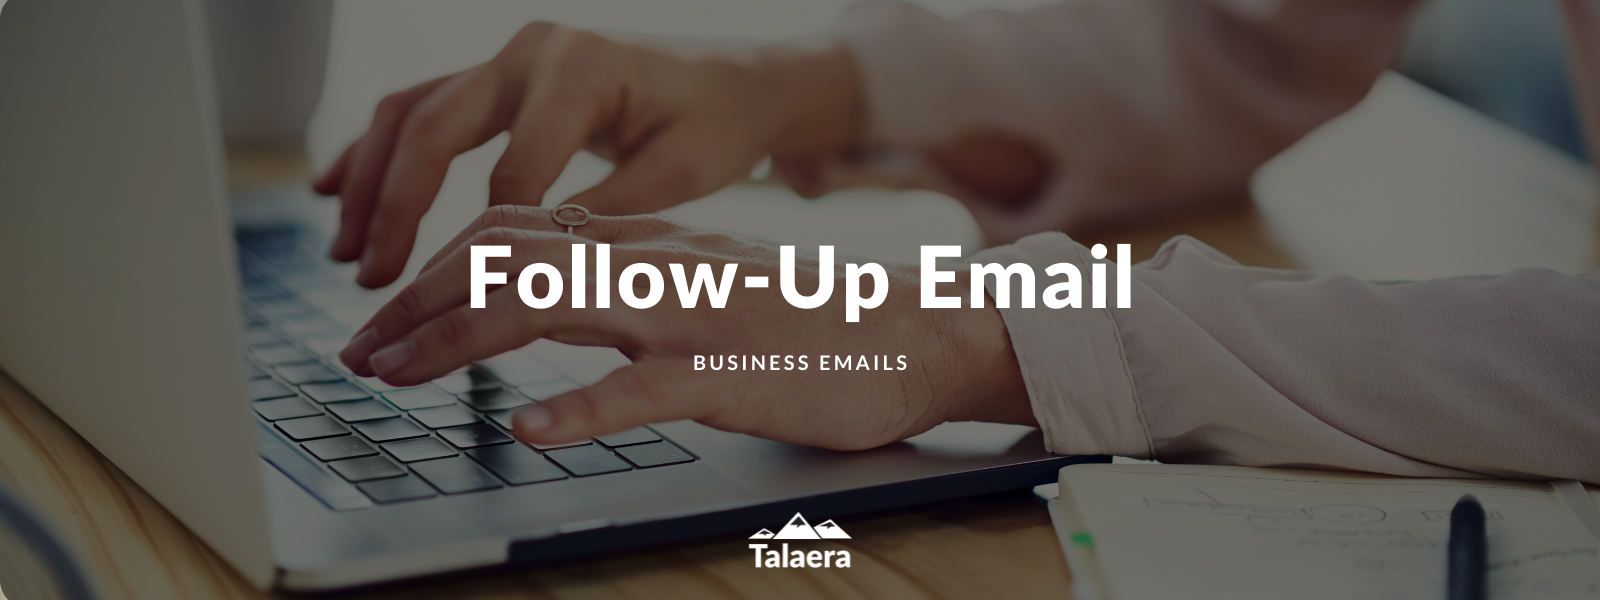 Follow Up Email - The Most Effective Way To Get A Response - Talaera Blog